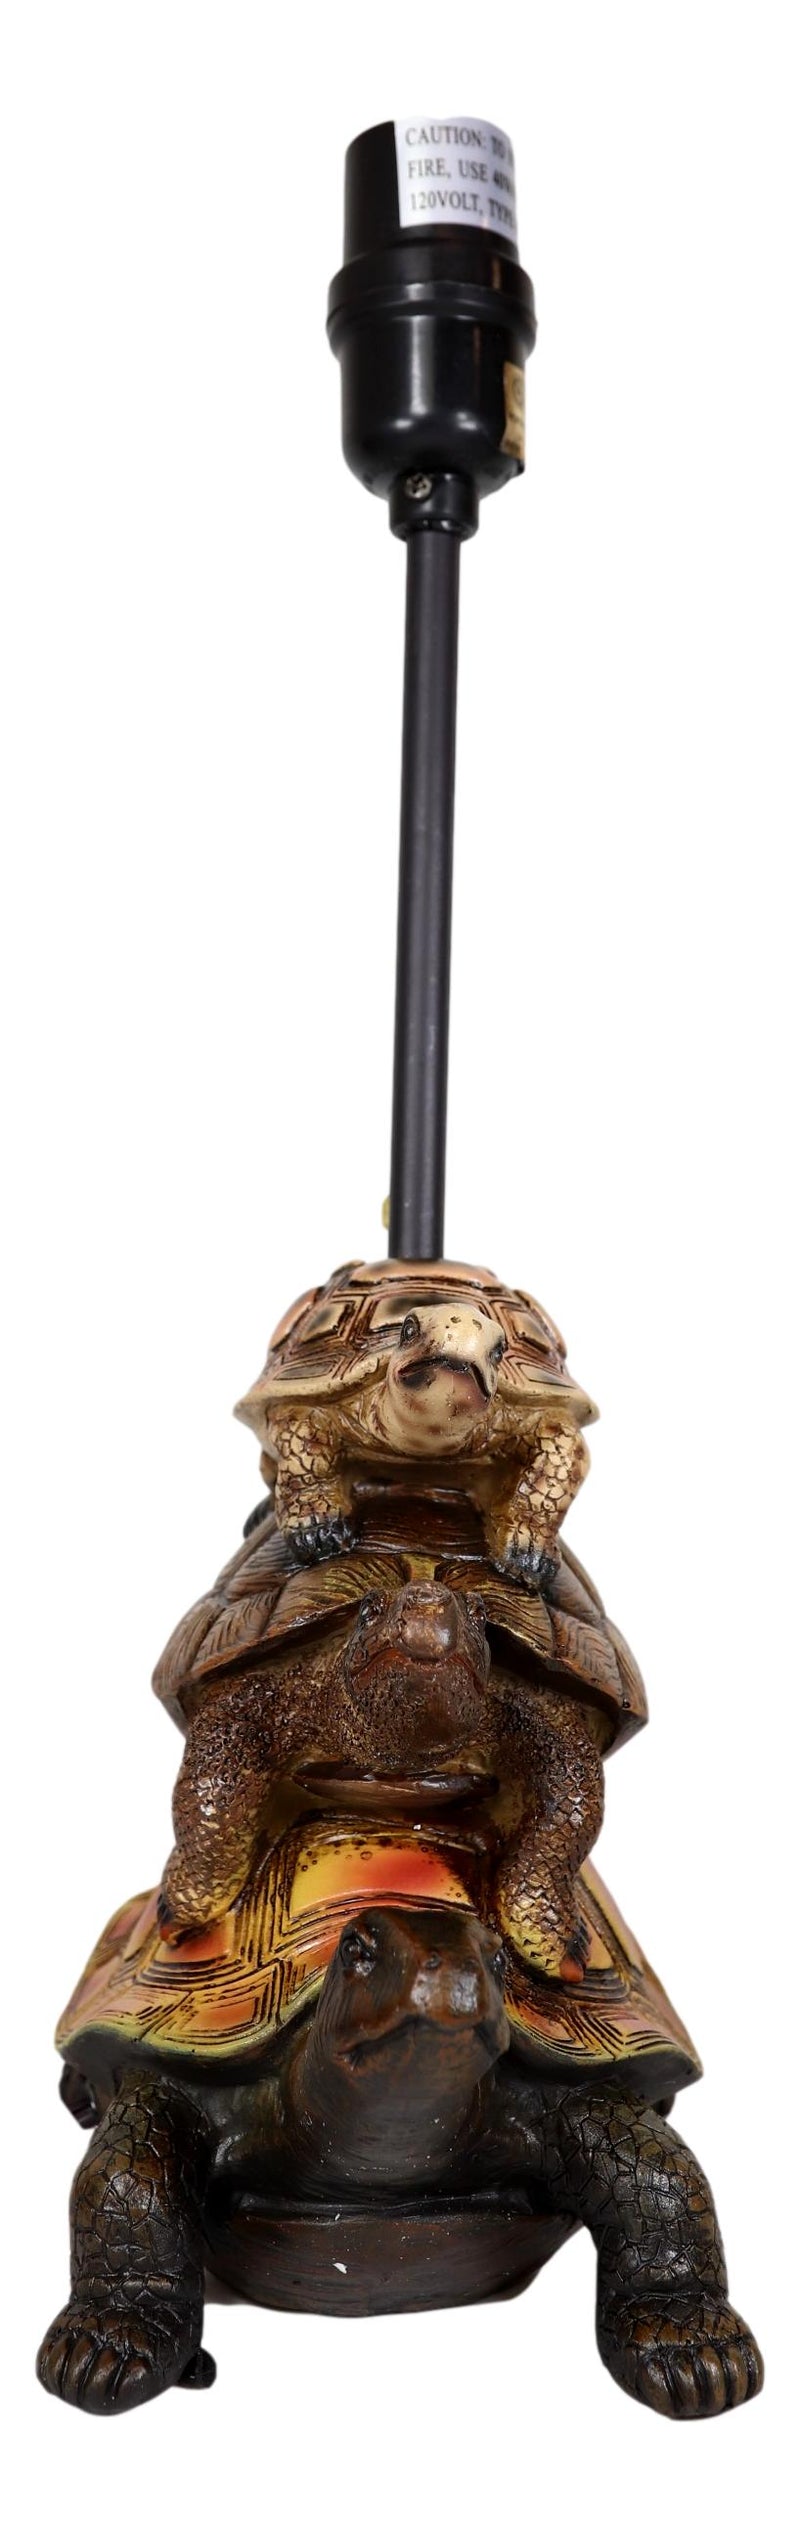 Nautical Marine Reptile Stacked Tortoises Turtles Desktop Table Lamp With Shade